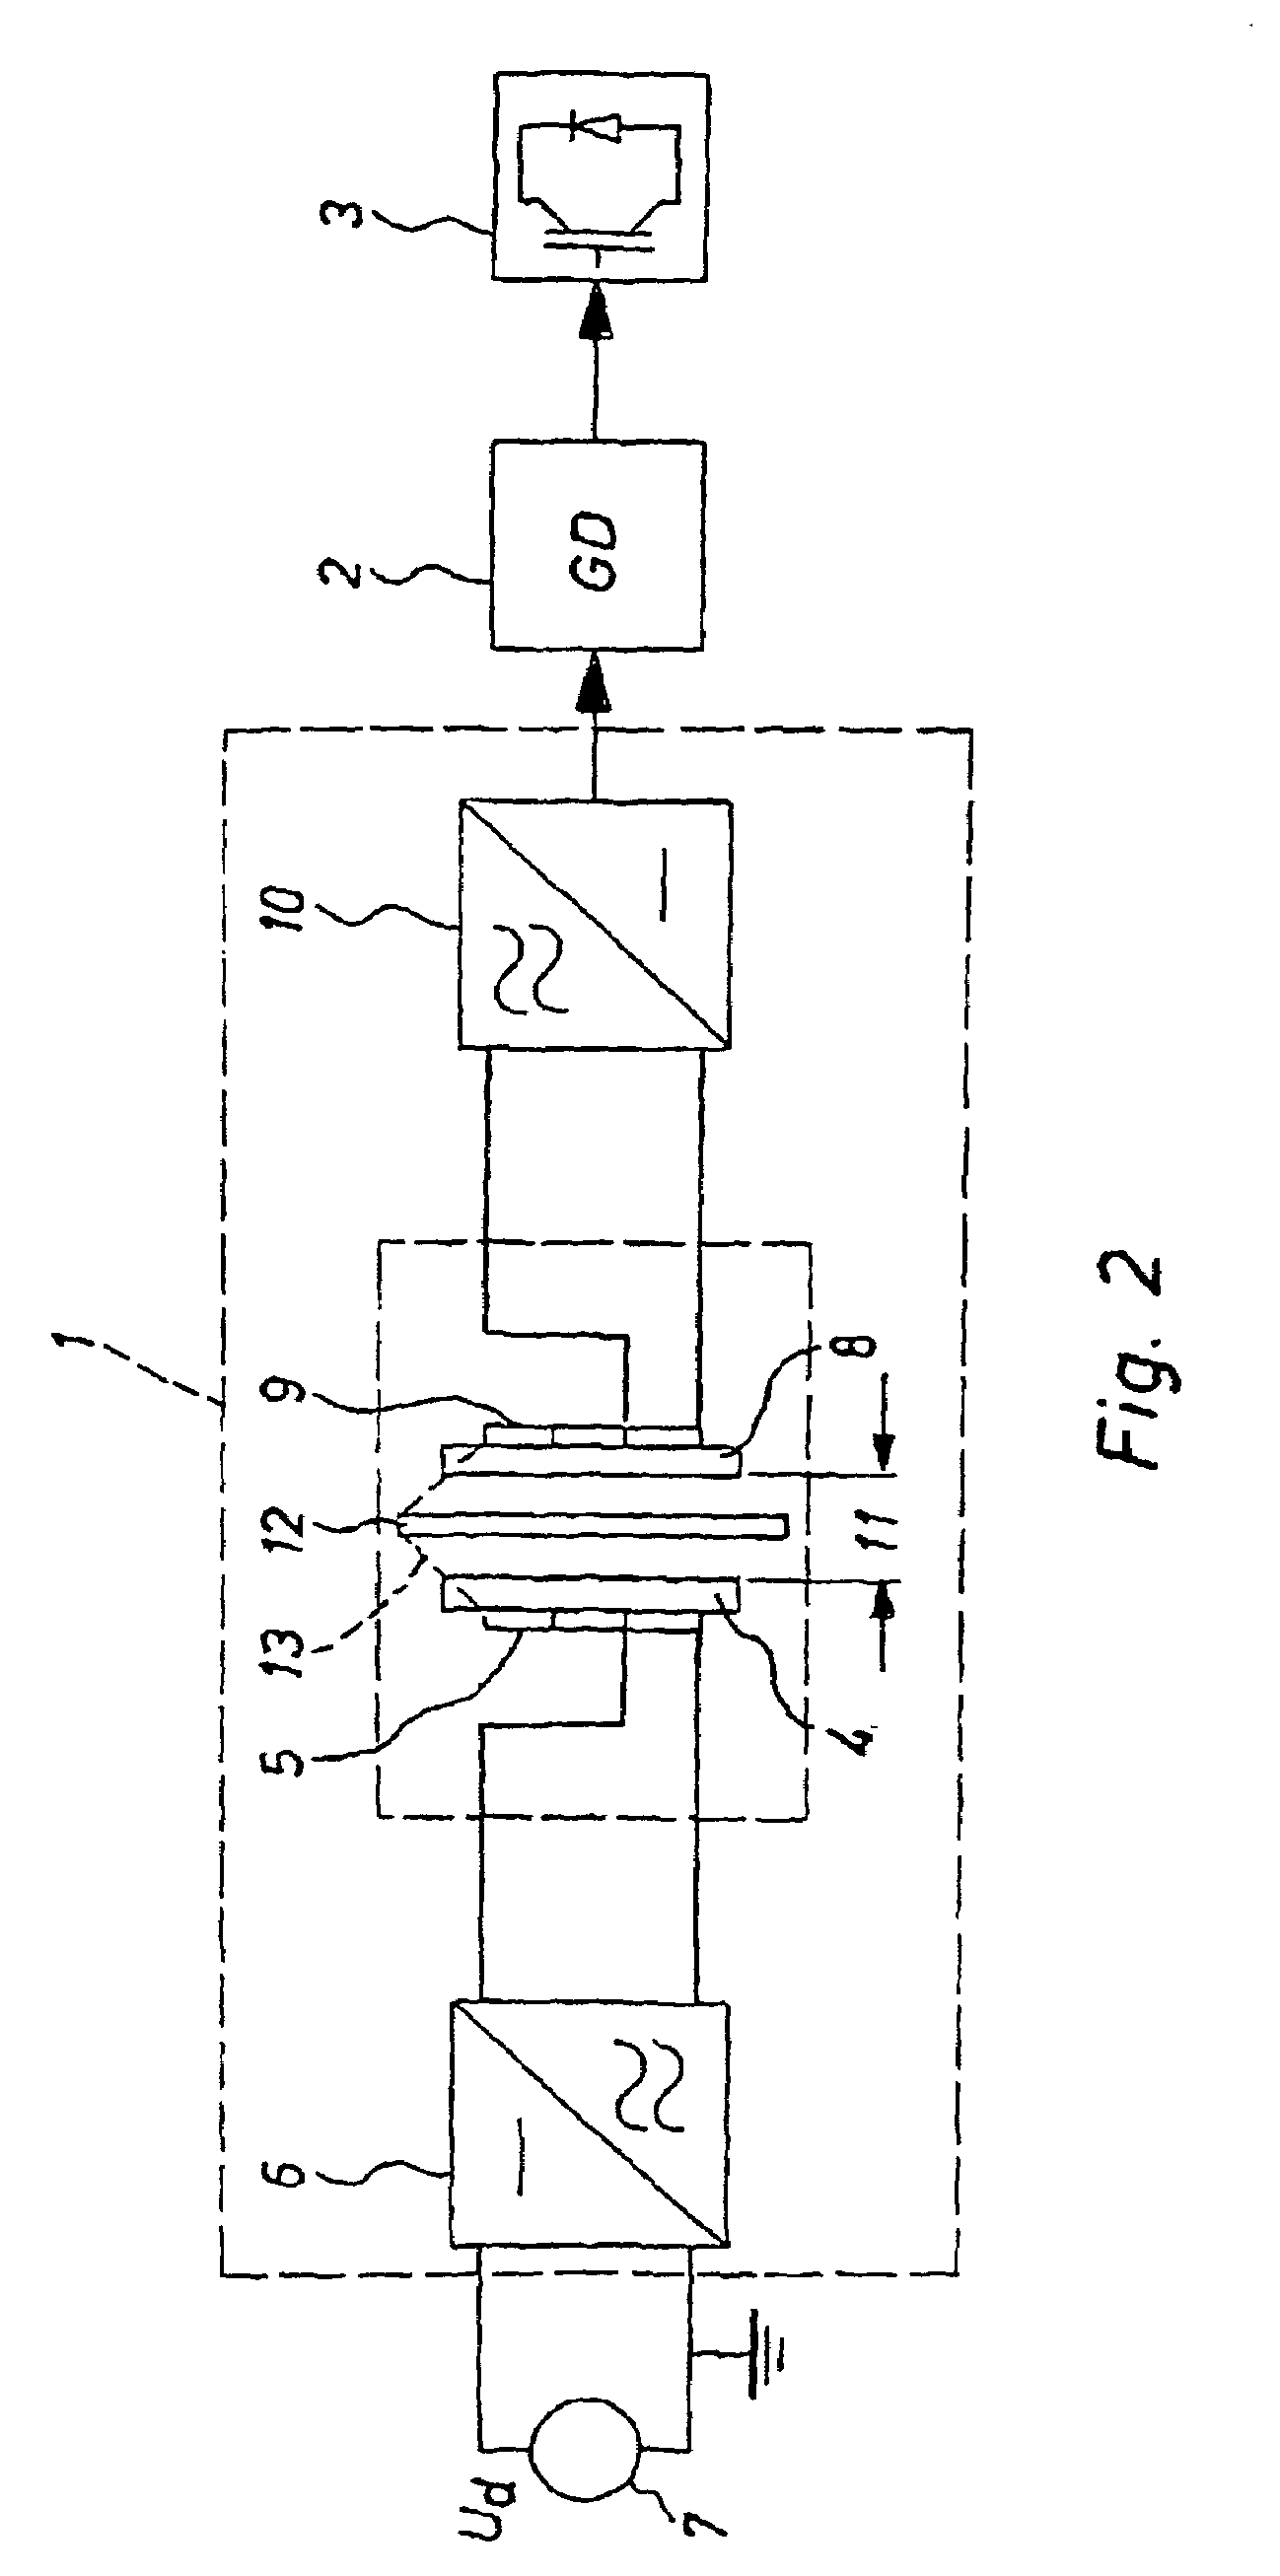 Energy supply unit for transmitting auxiliary energy to an electrical device